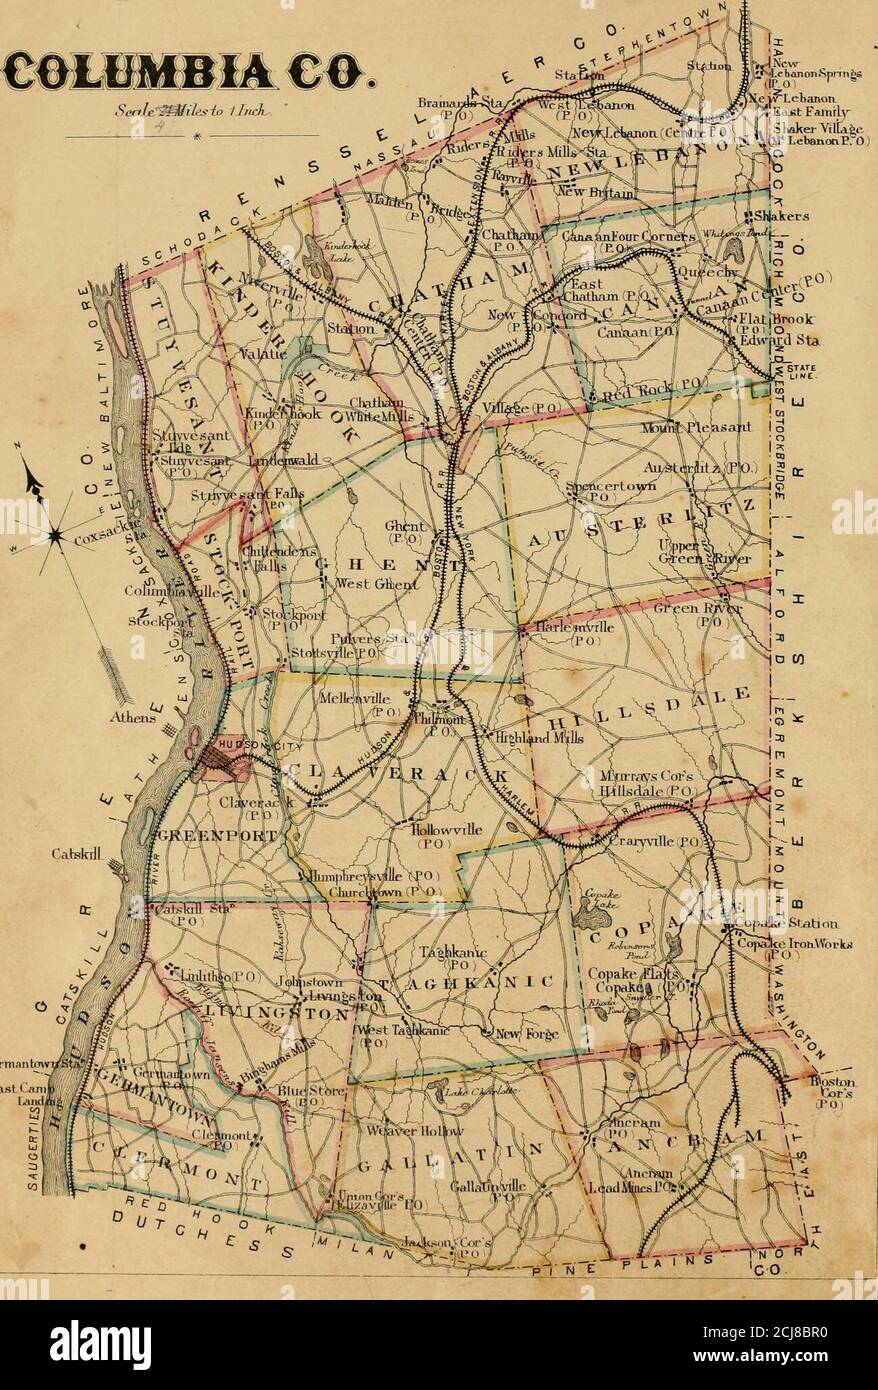 . History of Columbia County, New York. With illustrations and biographical sketches of some of its prominent men and pioneers . orace White Peaslee 296 David Ray 298 Daniel Reed 298 B. Gifford . • ■ • ;: 184192 202207209210210211212213 William Irish .... 299 Stephen L. Magoun .... Hiram Gage Hon. Theodore Miller Samuel Hand . Sf The Hand Family 314 Stephen Augustus Du BoisHon. Jacob W. Hoysradt .Hon. Samuel Anable William B. Cole .... John Kendall &lt;iMi Hon Darius Peck Moses Y. Tilden 317 Hon Jacob Ten Broeek Daniel S. Curtis 328 214215215216216217218222232234249 Samuel A. Barstow ....Danie Stock Photo